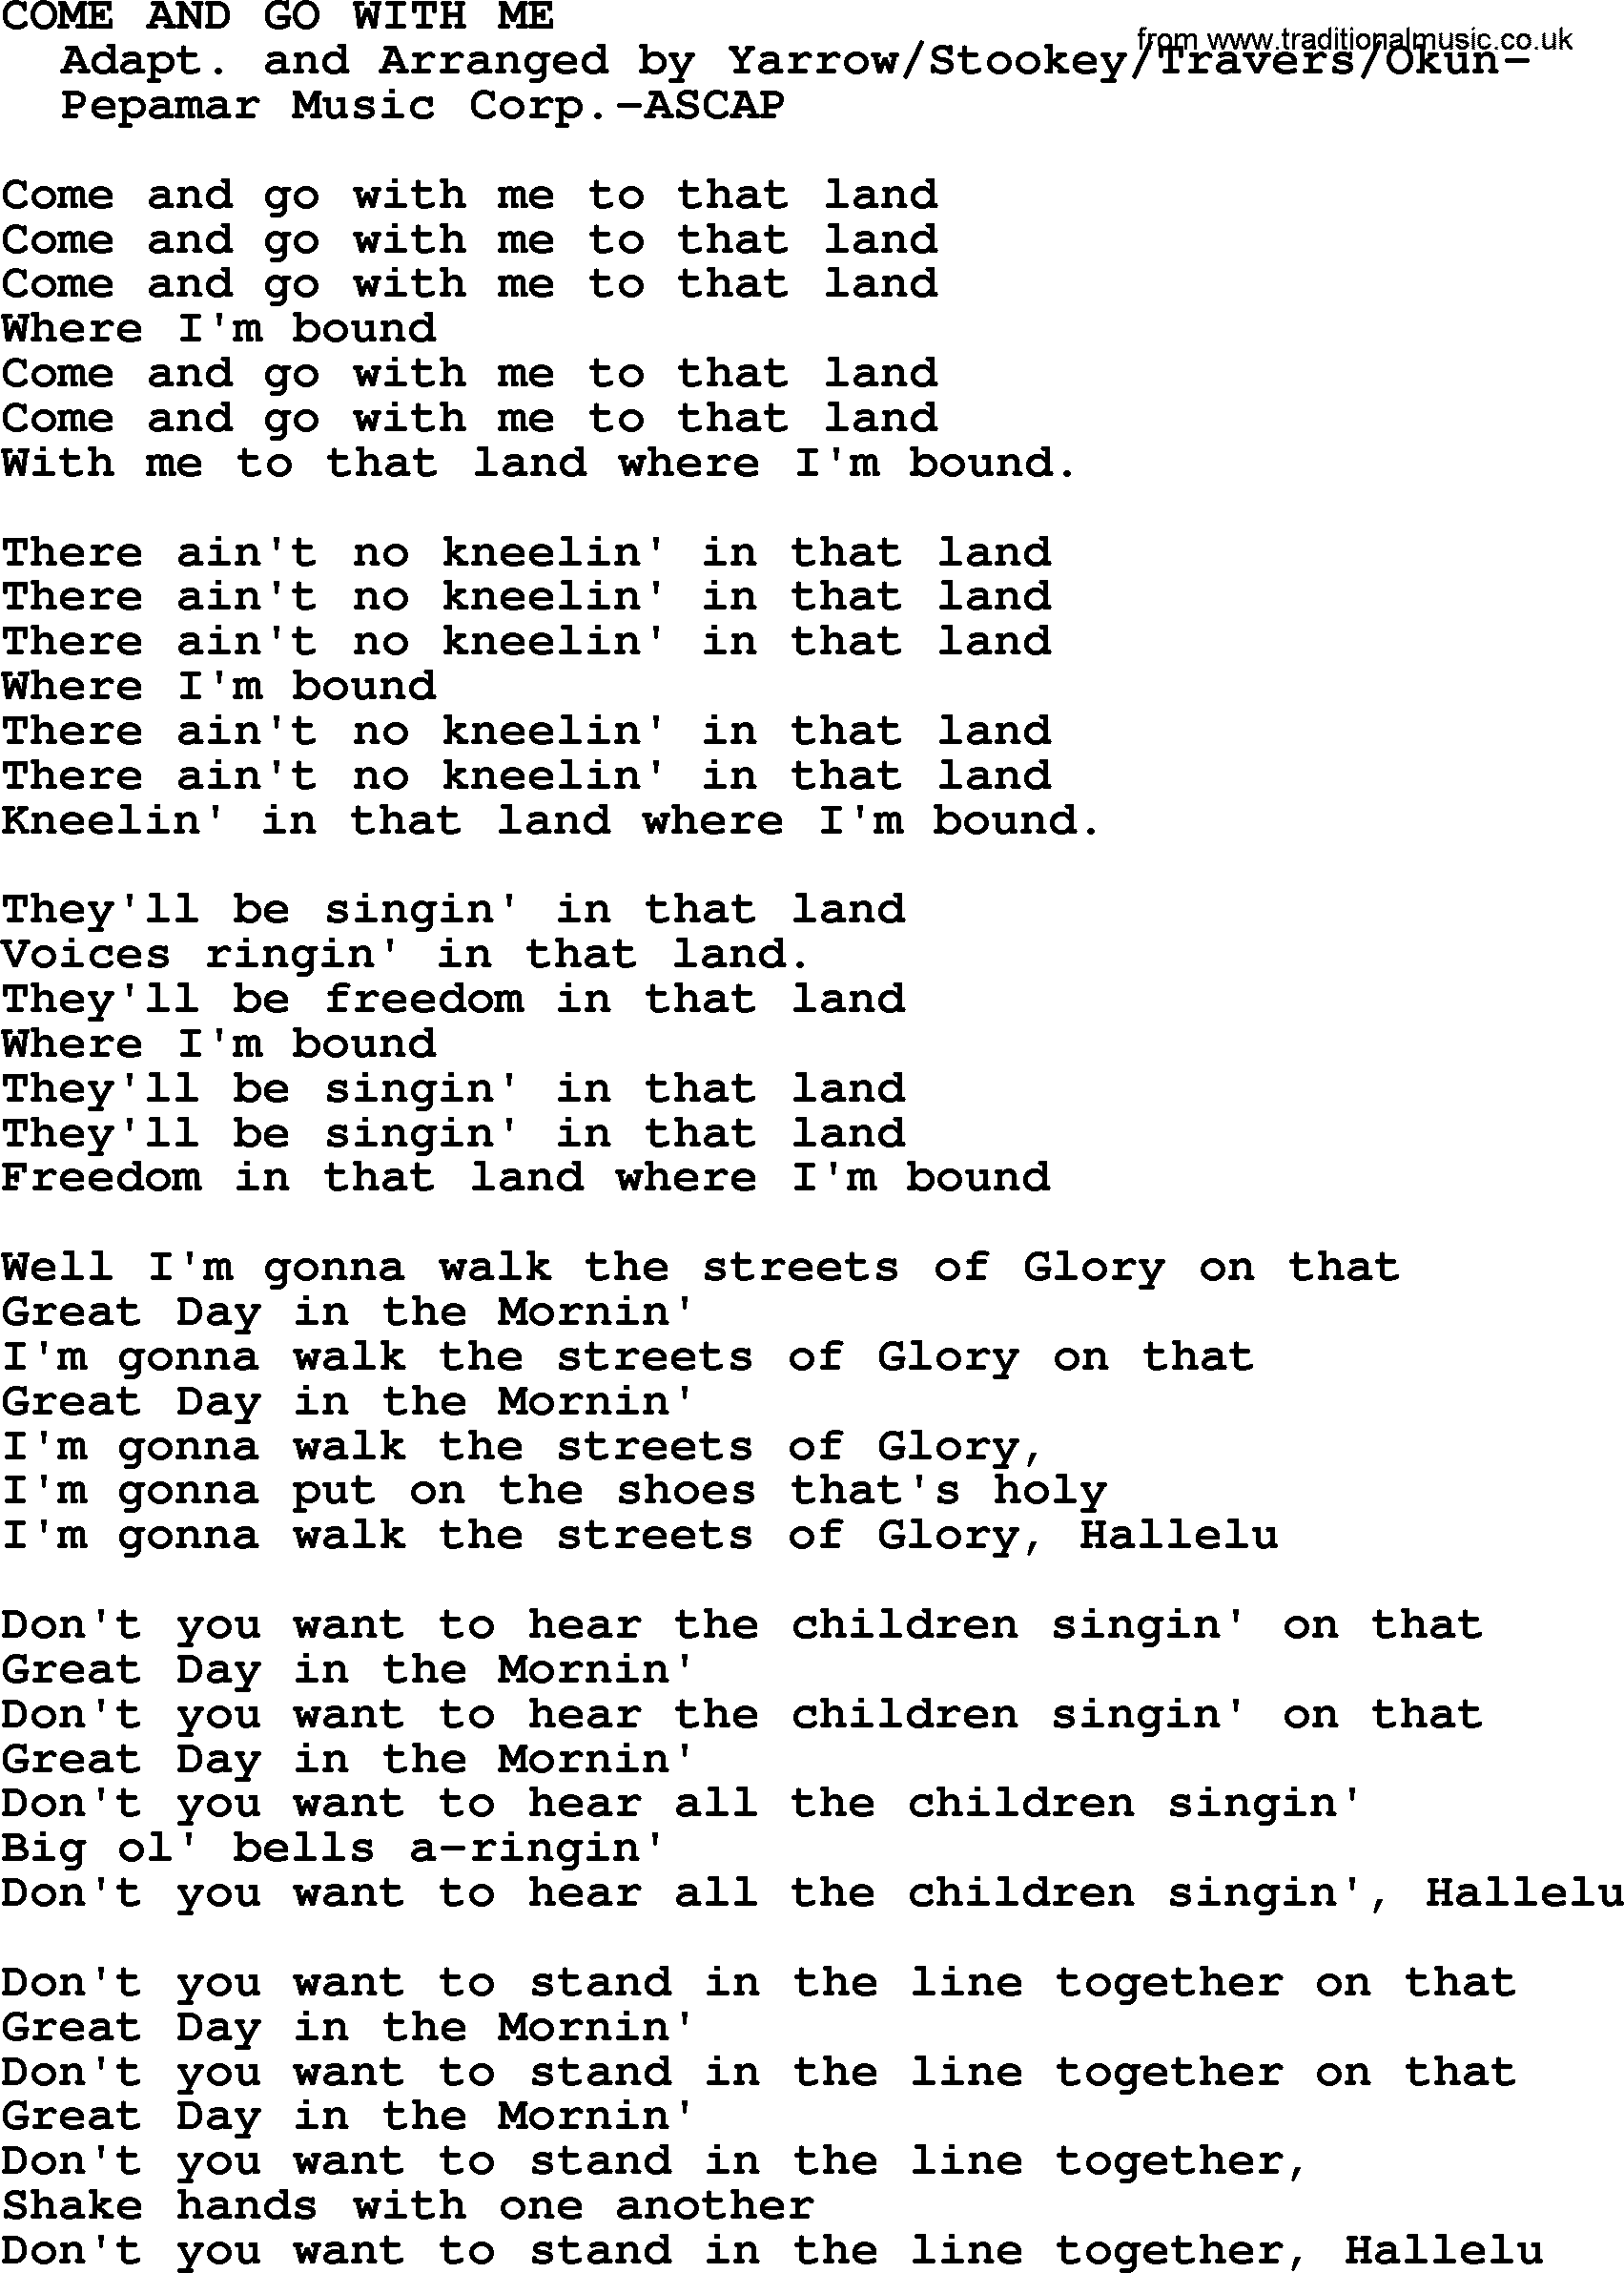 Peter, Paul and Mary song Come And Go With Me lyrics